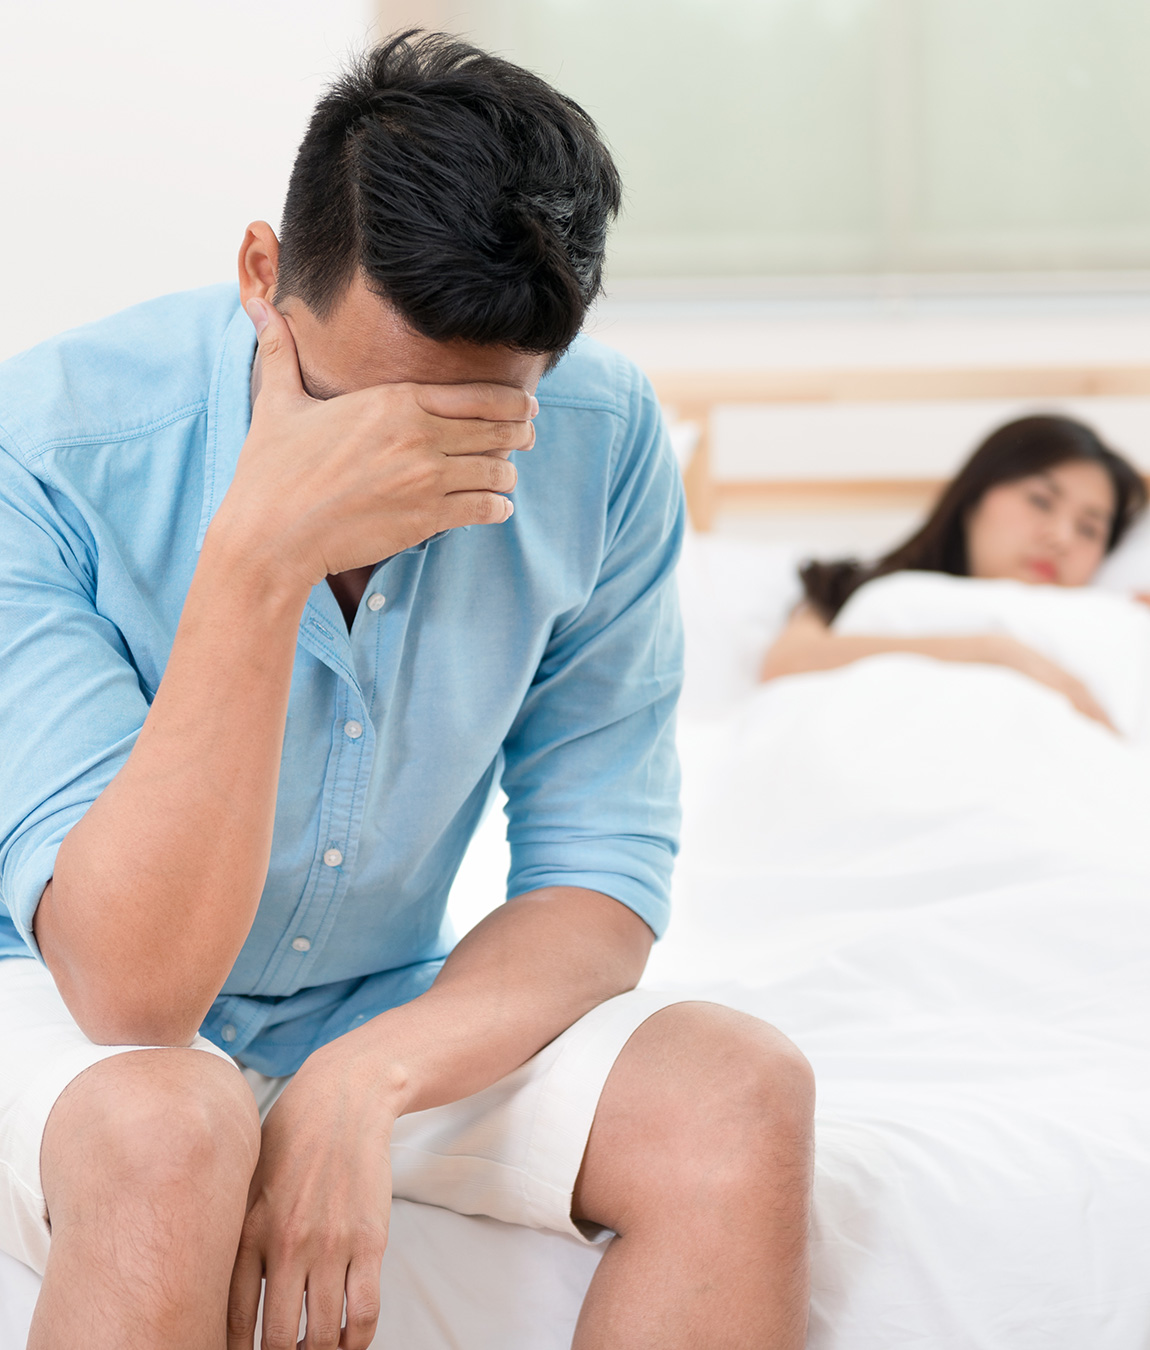 Married man dealing with hormonal imbalance issues